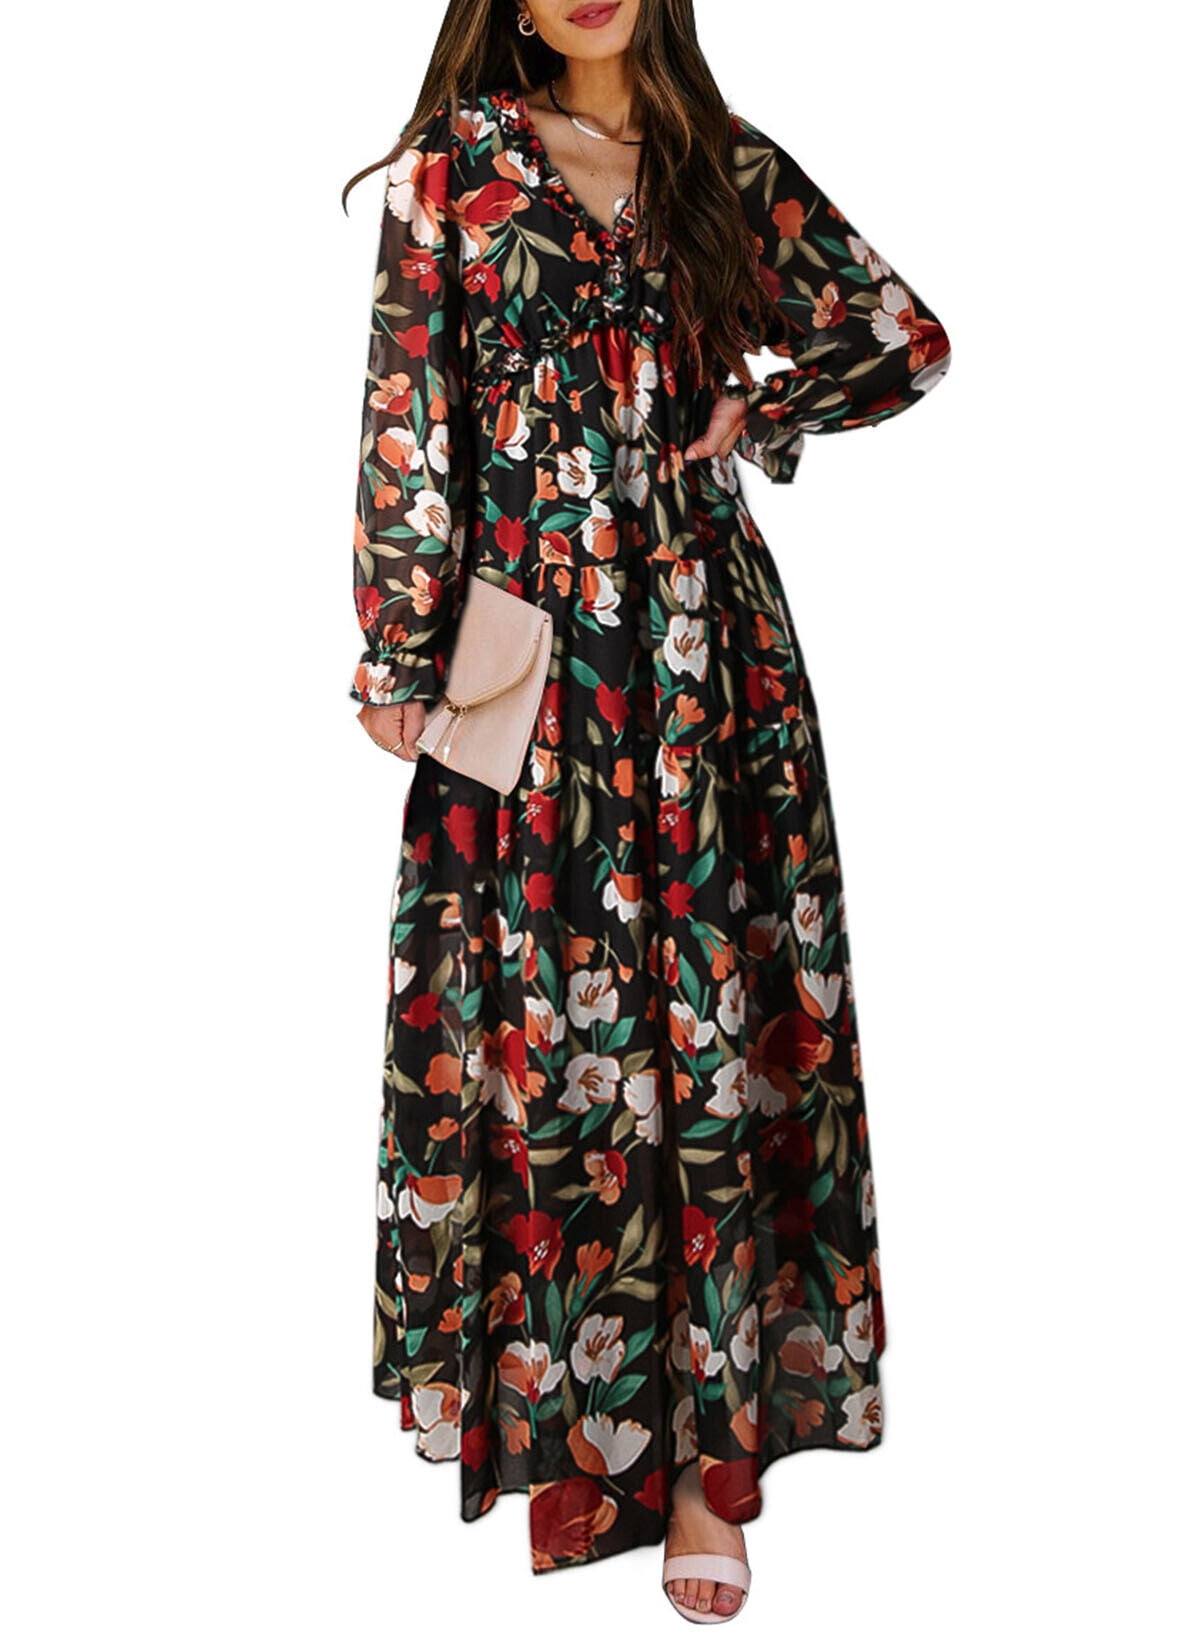 Dropship Women's Short Sleeve Floral Maxi Long Dress; Ladies Boho Party  Evening Casual Dress; Women's Clothing to Sell Online at a Lower Price